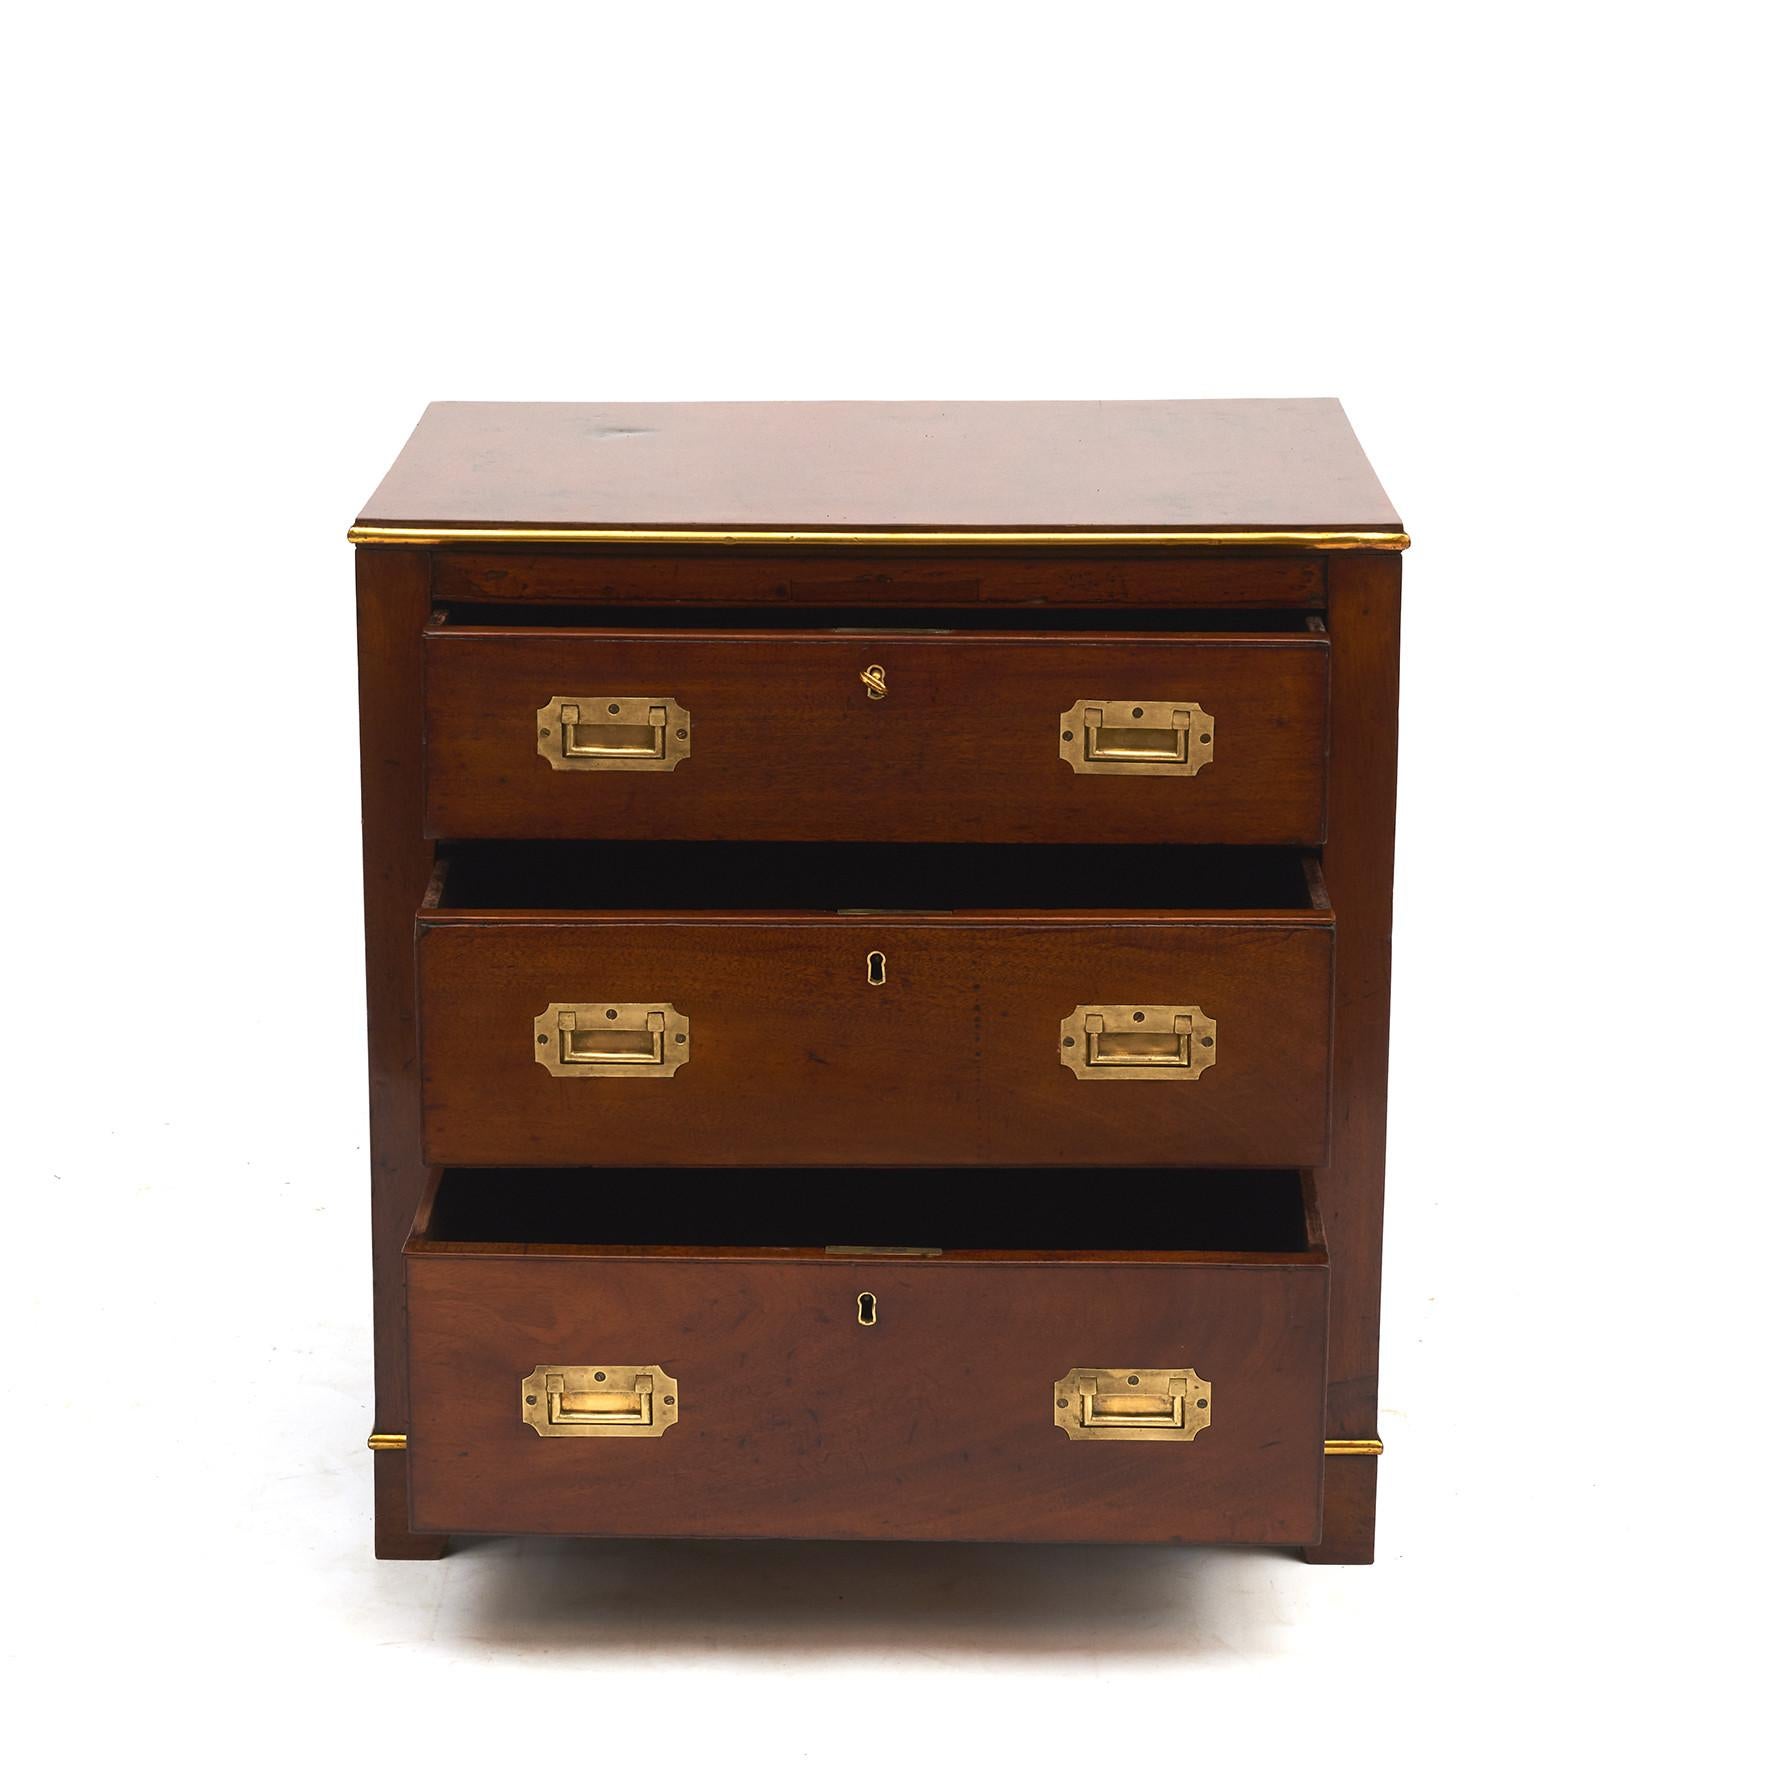 Smaller Military Campaign chest of drawers (rare in this size) crafted in solid mahogany.
Top and bottom finished with a brass trim. Brass carrying handles to the sides and inset brass military drawer handles.
England, circa 1880.
French